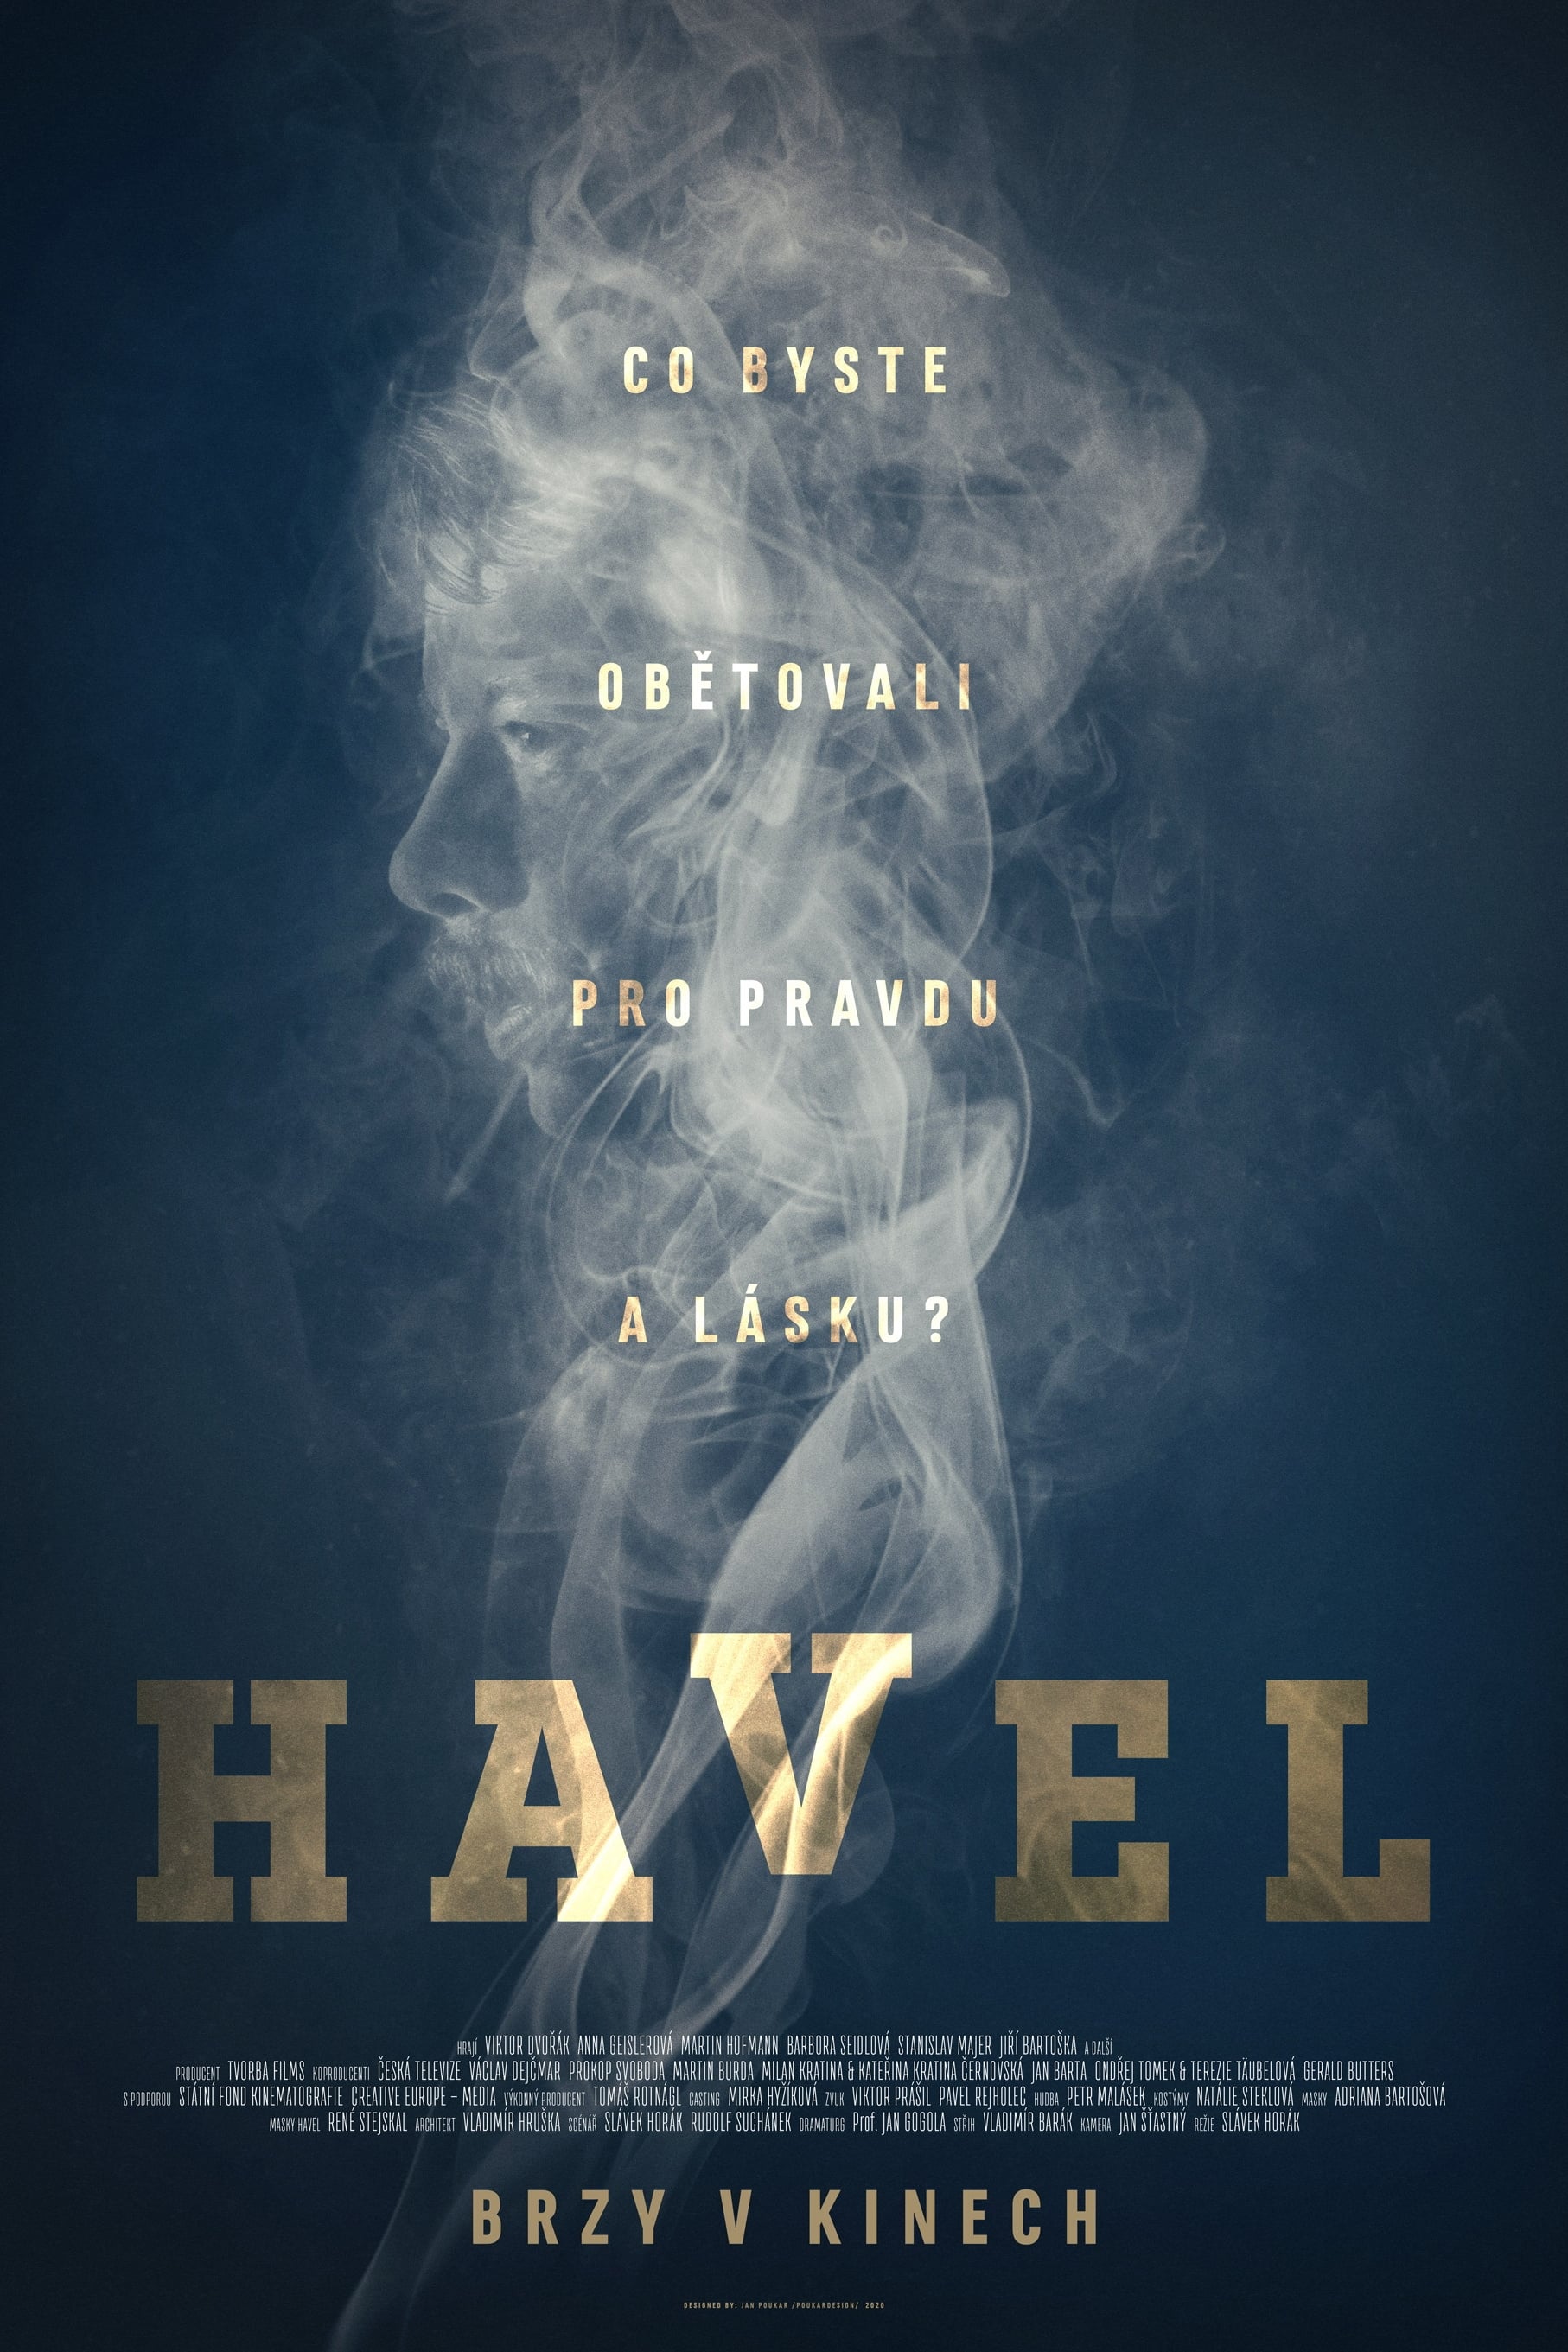 Havel streaming